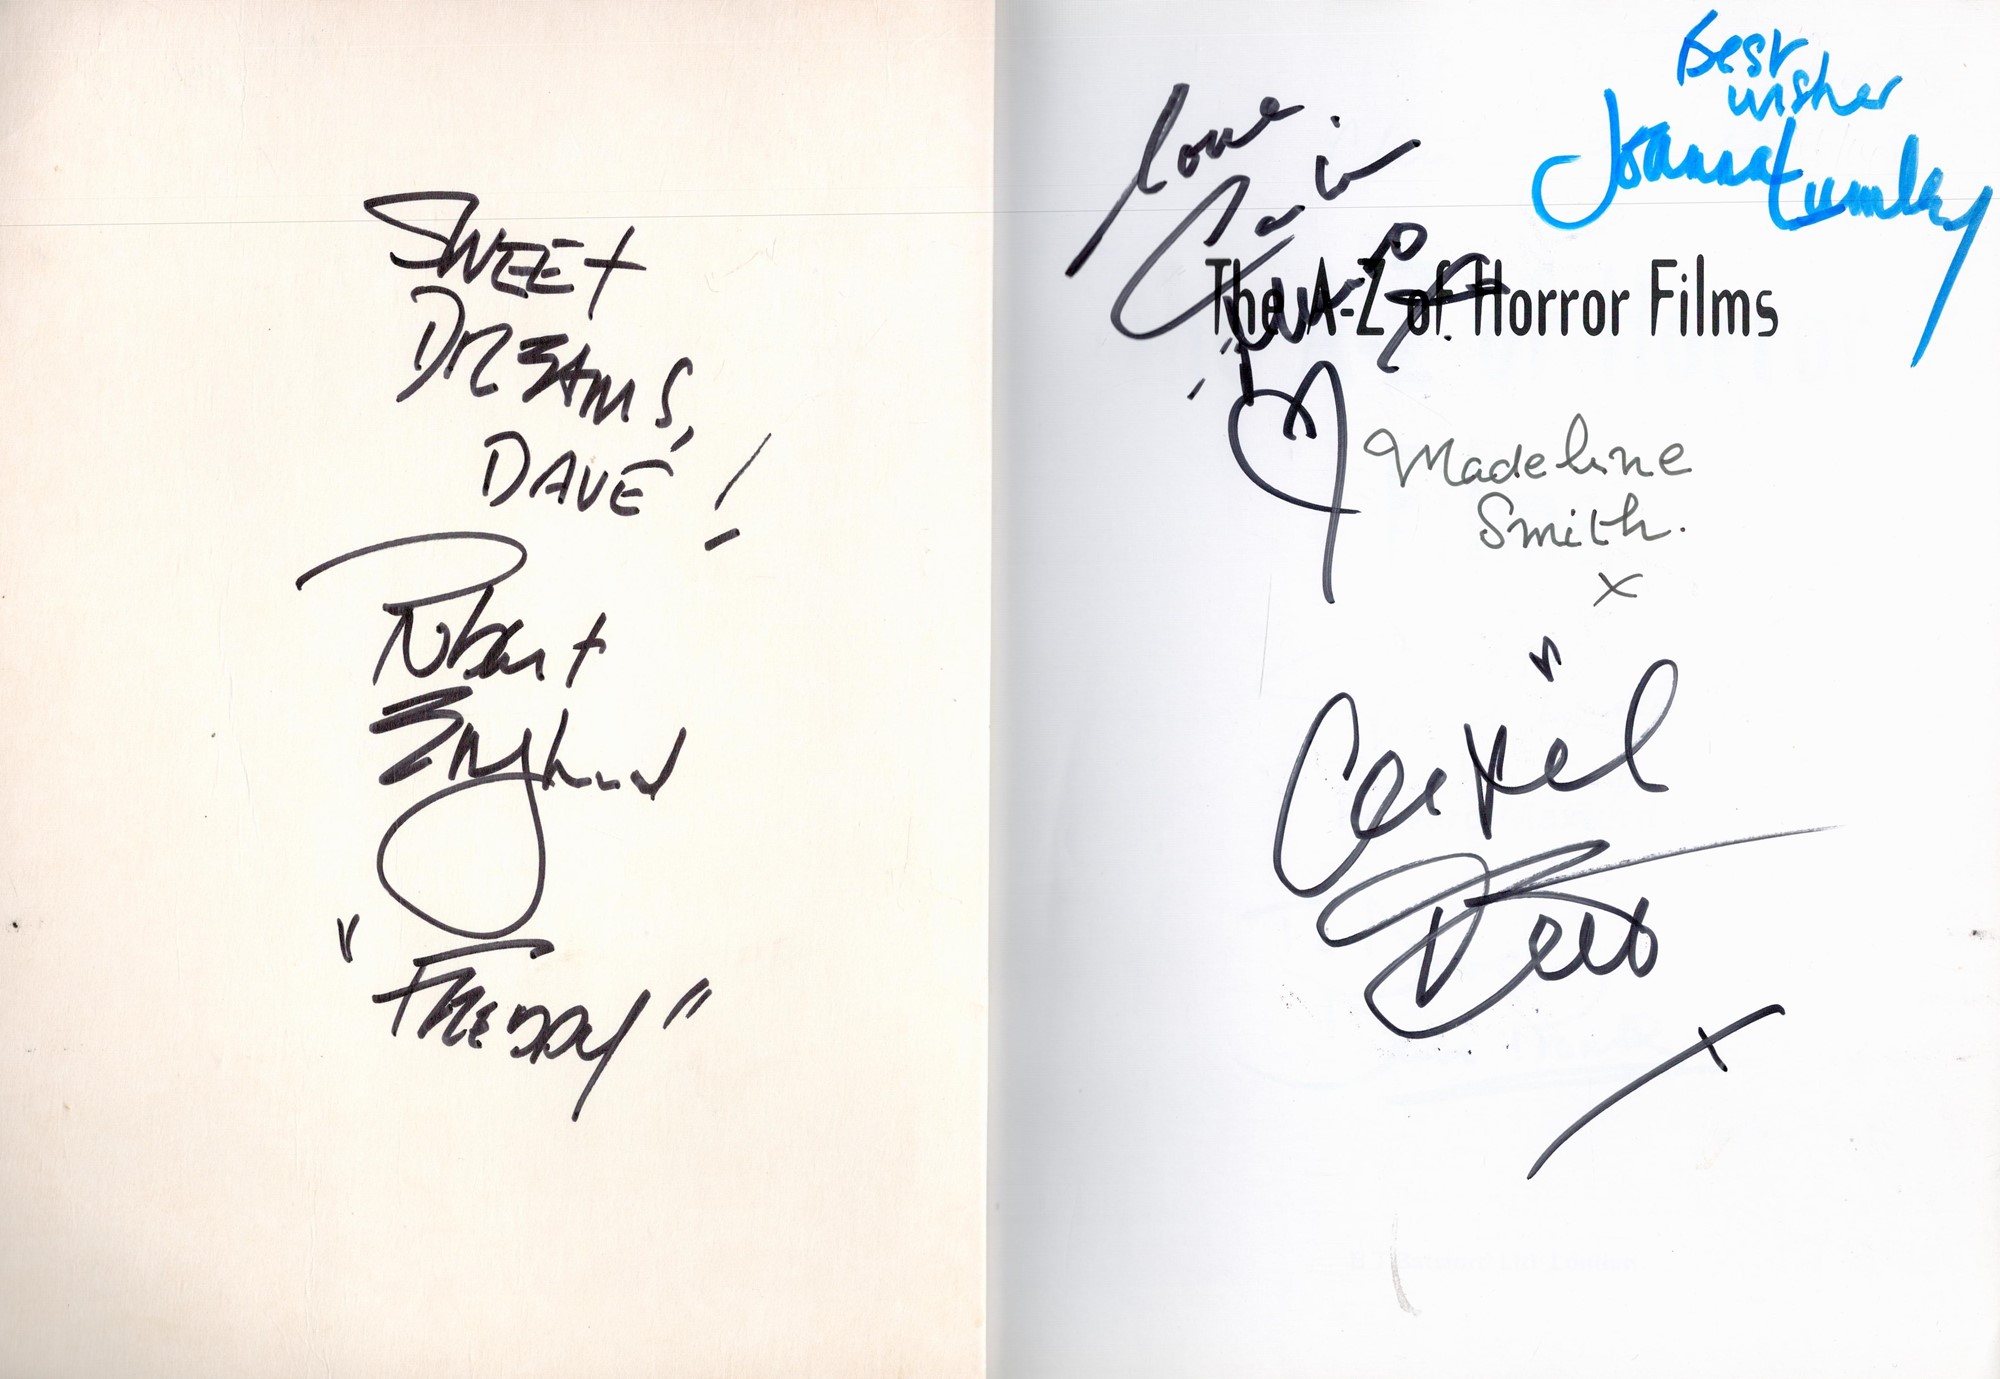 A-Z of Horror Films multi signed Paperback book signatures inside include Robert Englund, Joanna - Image 2 of 4